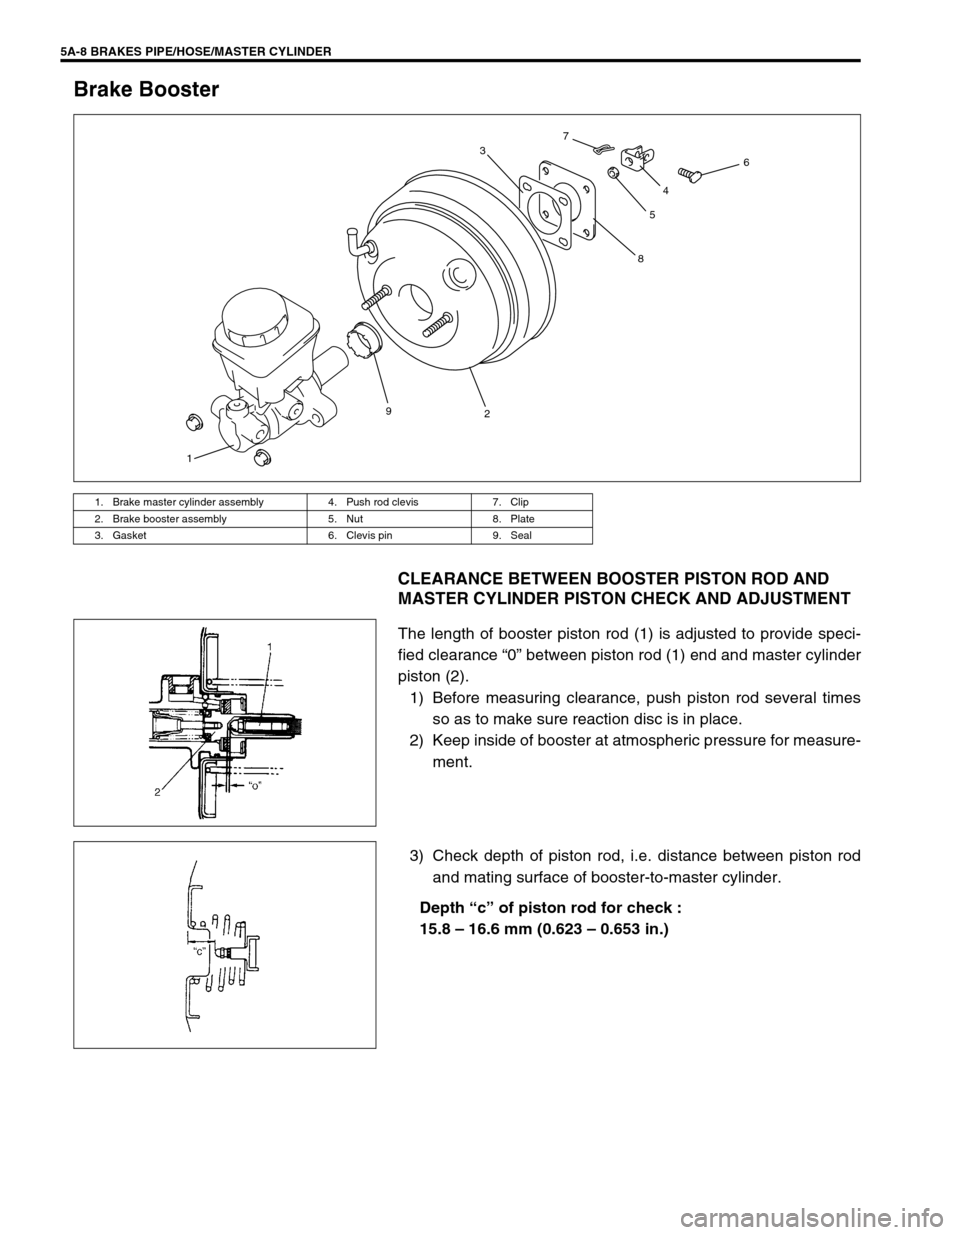 SUZUKI GRAND VITARA 1999 2.G Owners Manual 5A-8 BRAKES PIPE/HOSE/MASTER CYLINDER
Brake Booster
CLEARANCE BETWEEN BOOSTER PISTON ROD AND 
MASTER CYLINDER PISTON CHECK AND ADJUSTMENT
The length of booster piston rod (1) is adjusted to provide sp